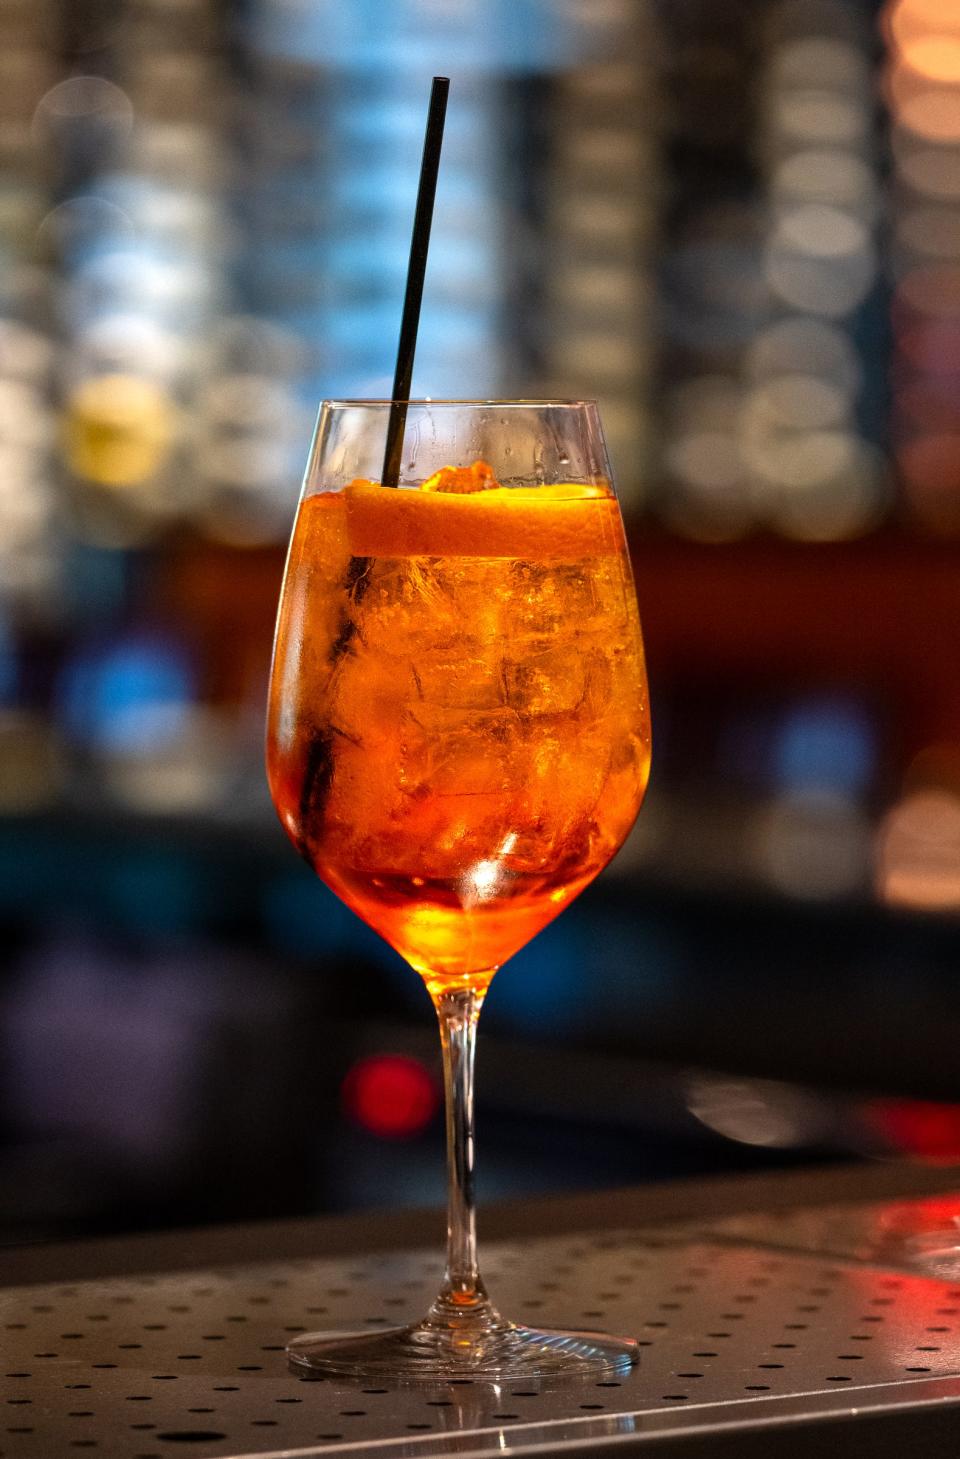 An Aperol spritz made with Aperol, prosecco and club soda is a refreshing drink for a summer day.